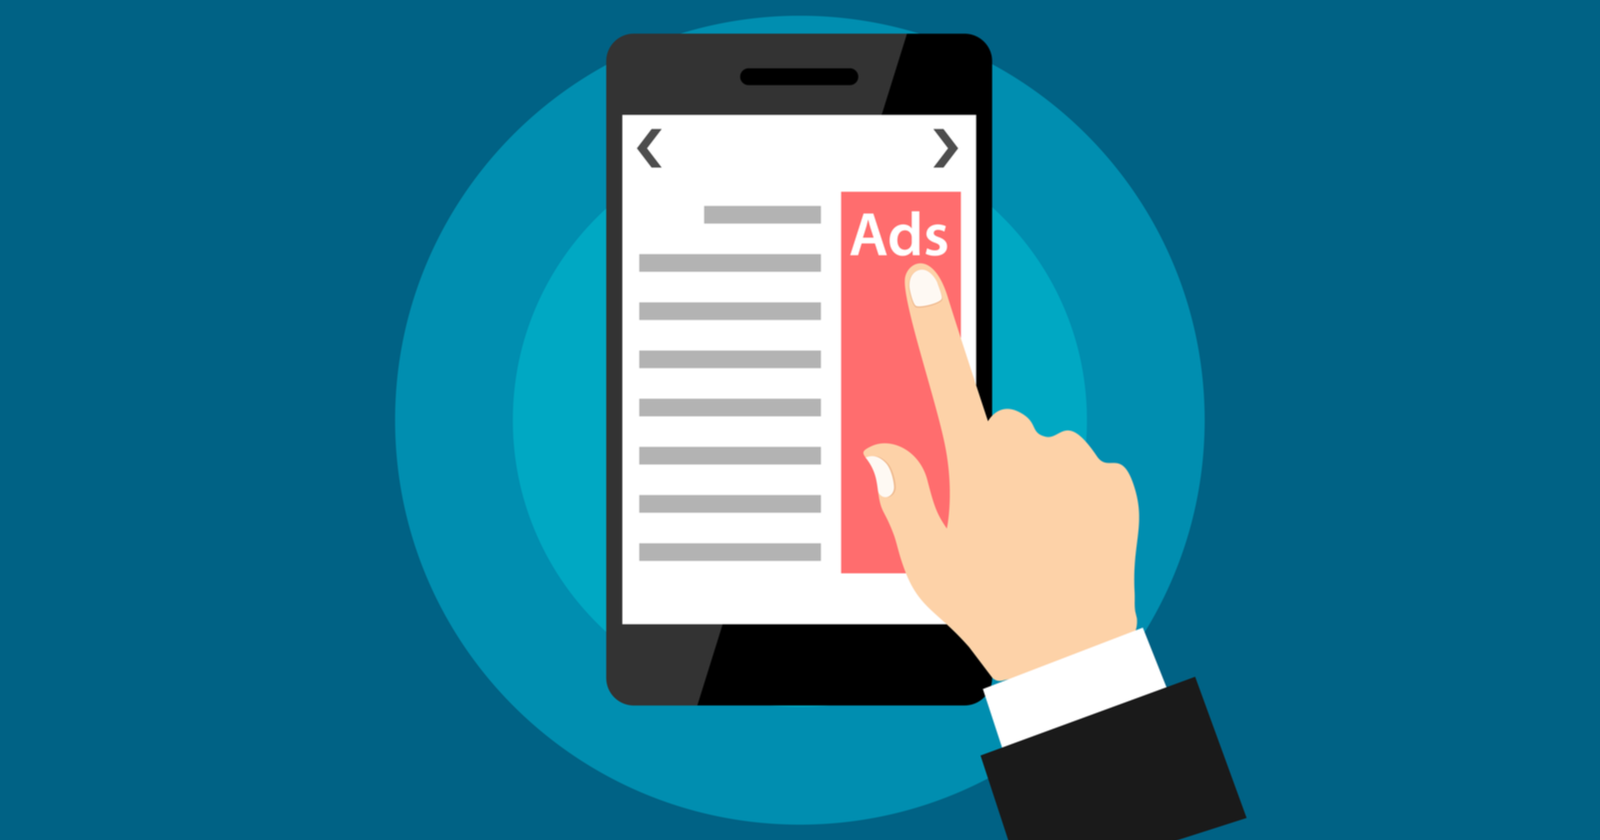 How To Use Paid Search & Social Ads For Promoting Events